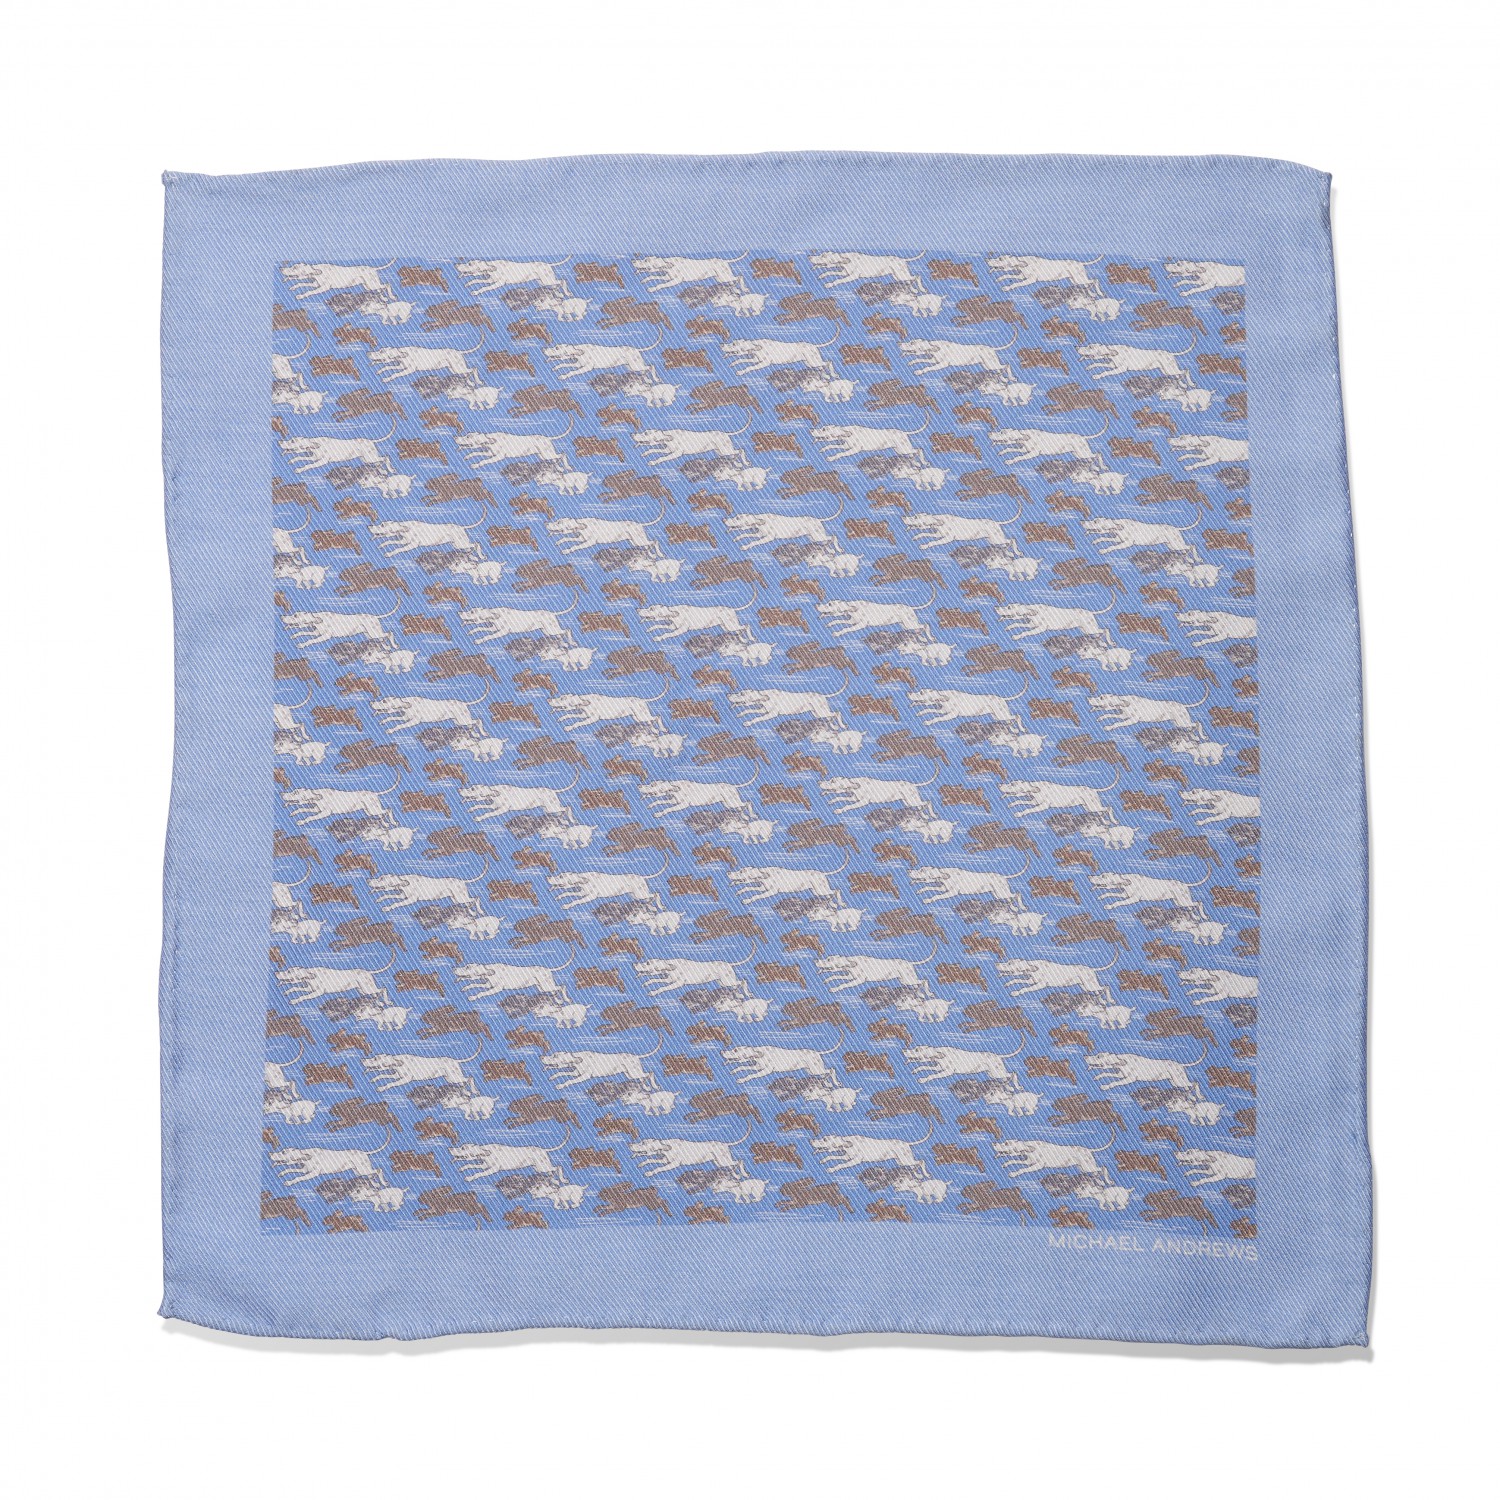 Hunting Hounds in Blue, Tan & White Pocket Square